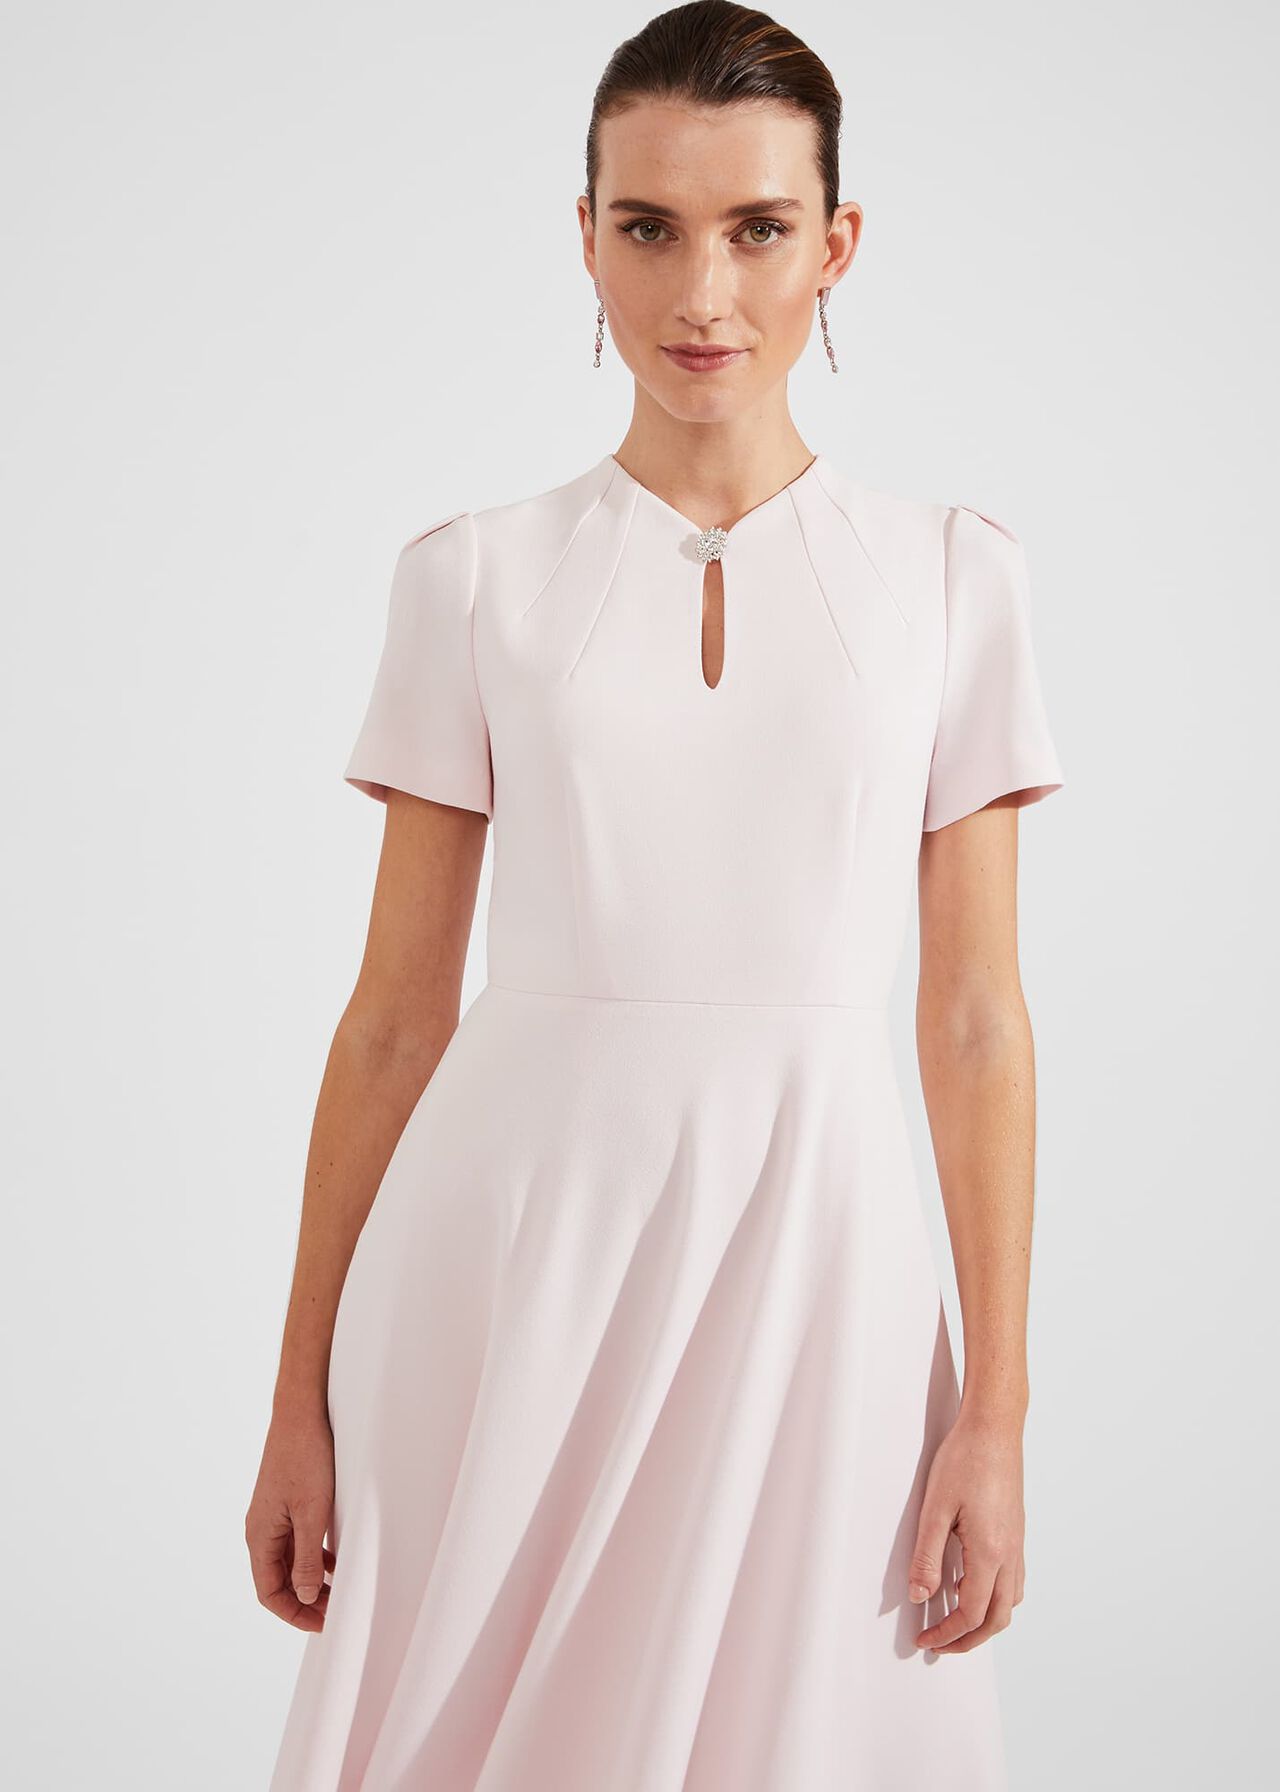 Chara Fit And Flare Dress, Pale Pink, hi-res